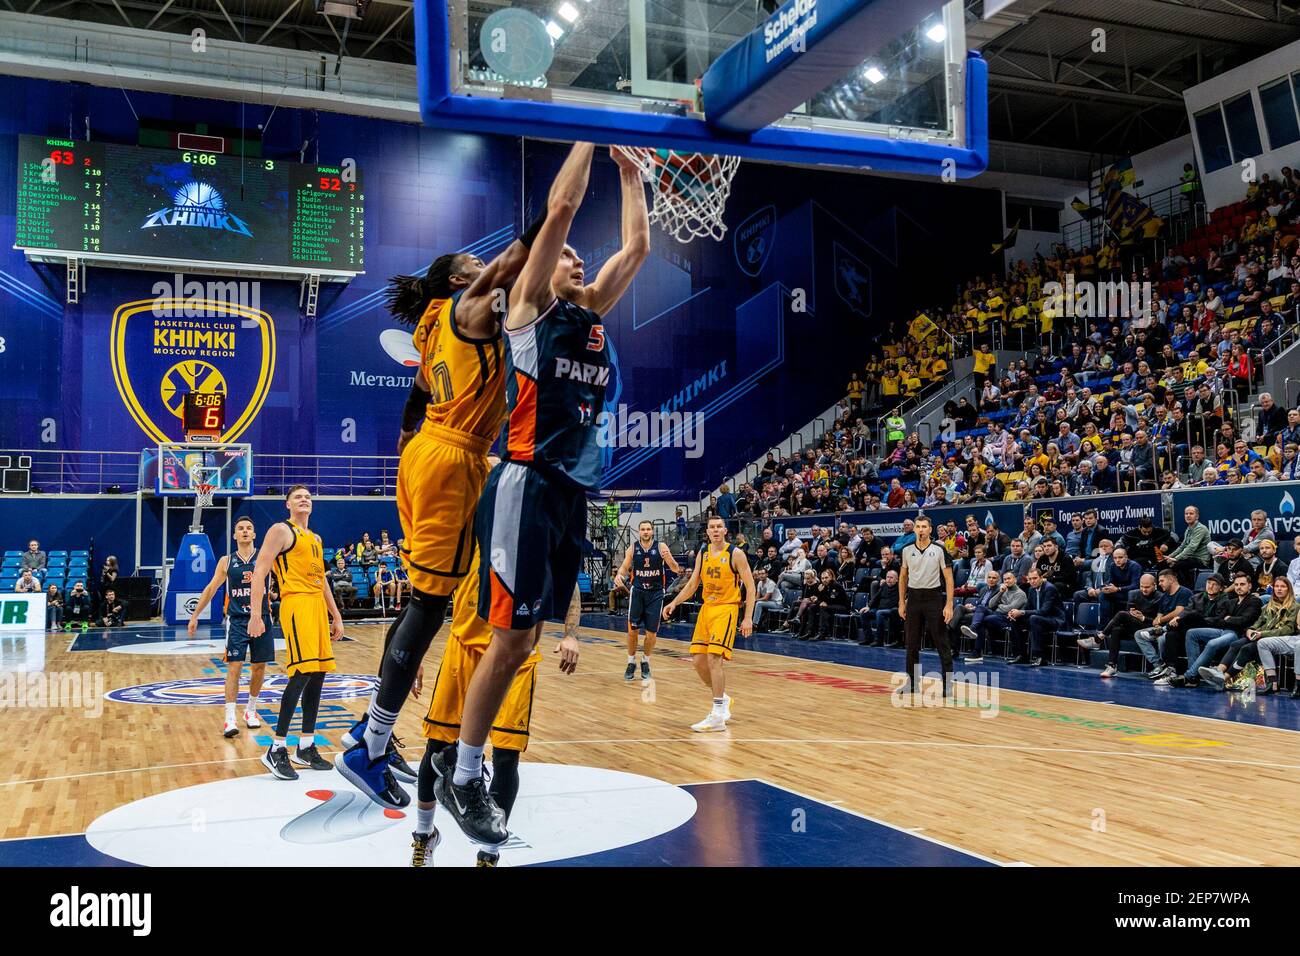 5 Marek Mejeris of Parma Perm seen in action against Khimki Moscow during  the VTB United League match between Khimki Moscow and Parma Perm. (Final  score; Khimki Moscow 103-100 Parma Perm) (Photo